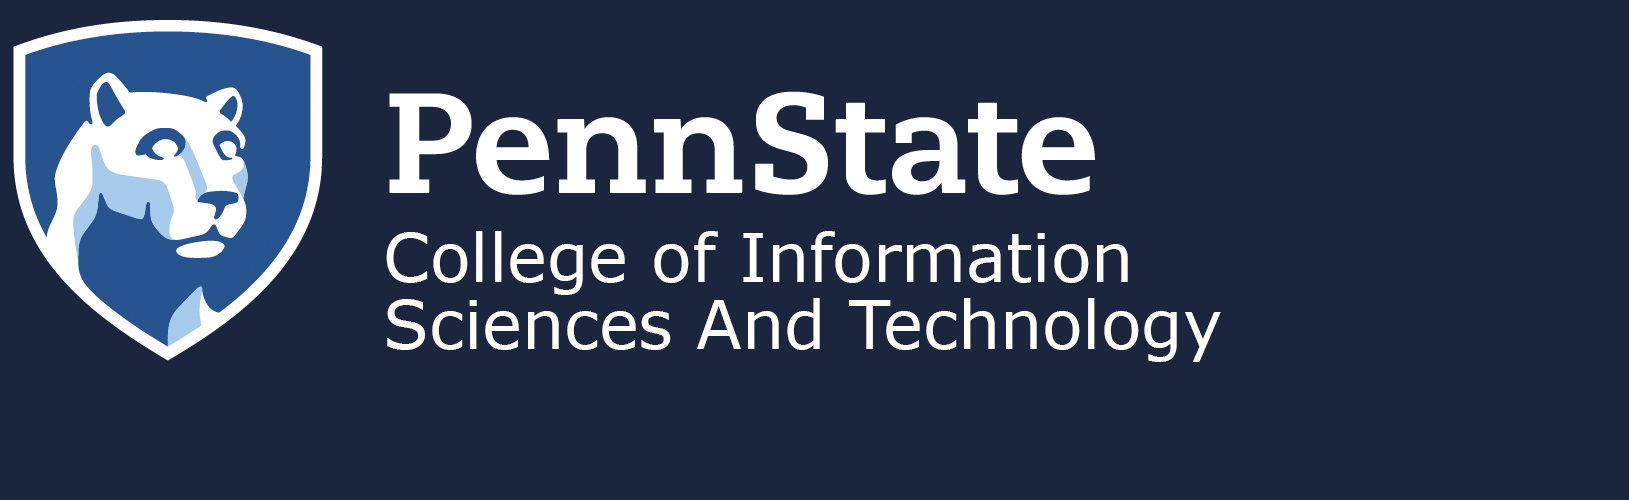 Penn State/ College Of Information Science And Technology Logo